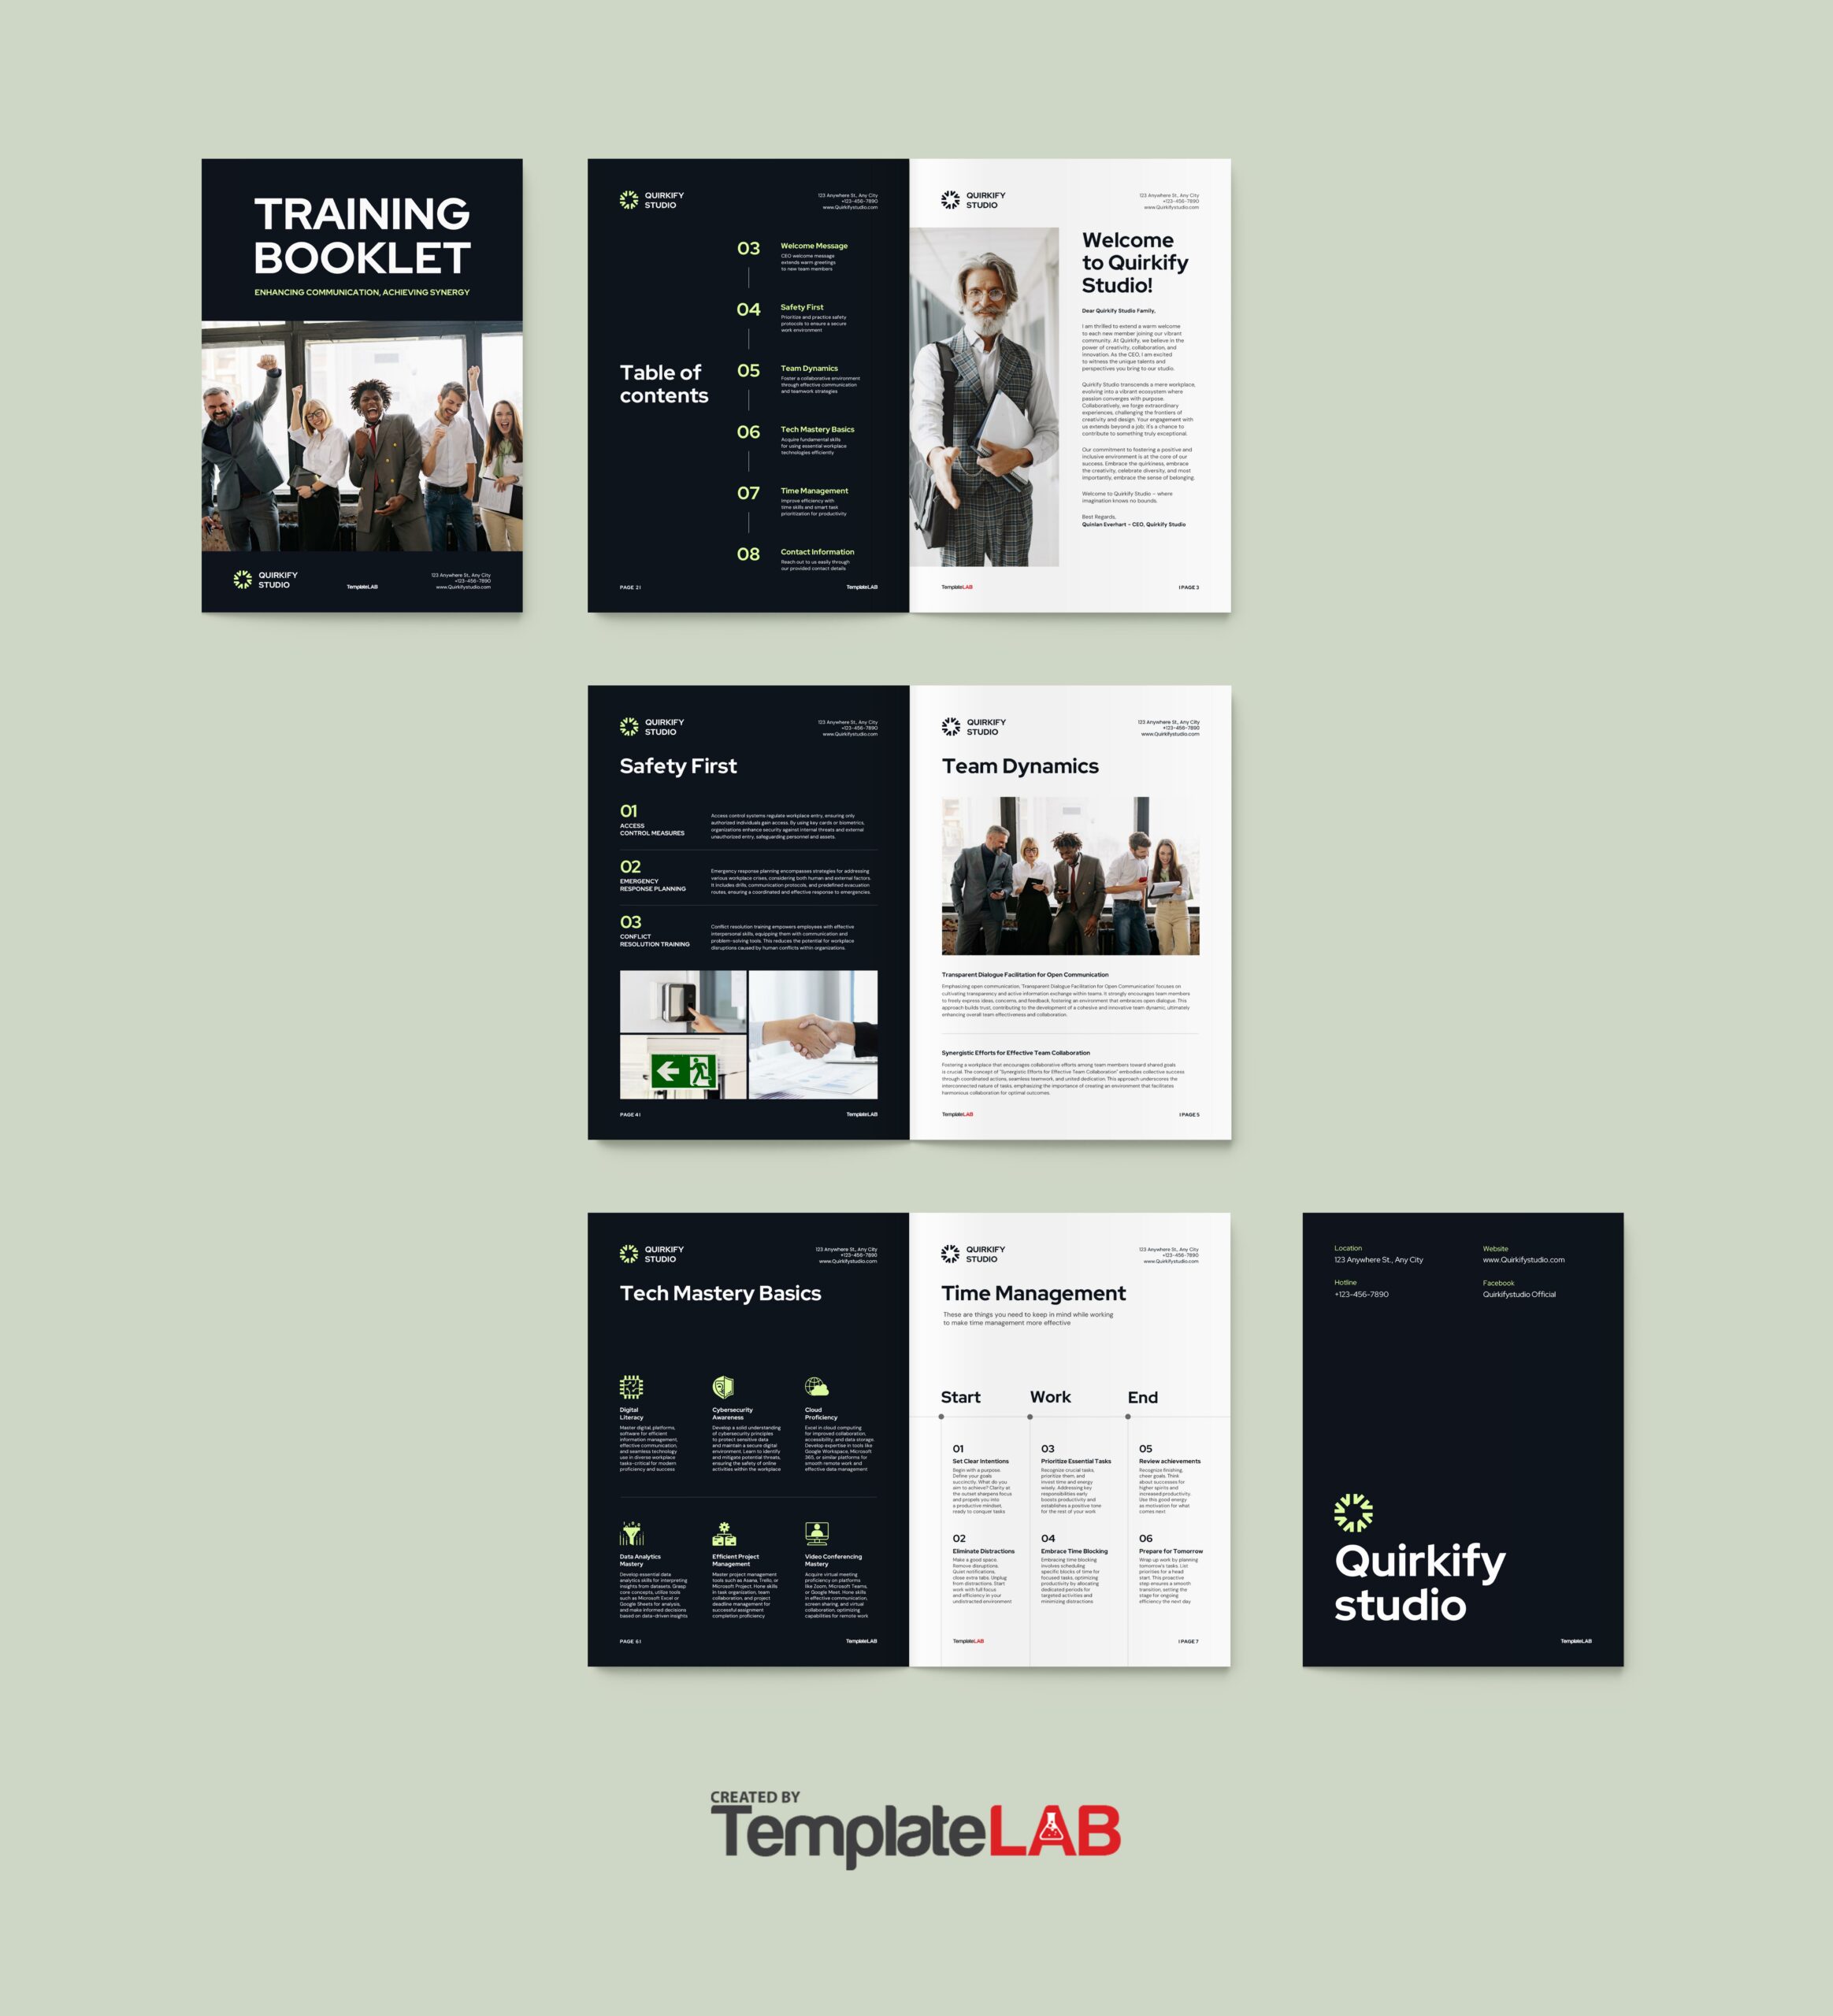 Free Training Booklet Template